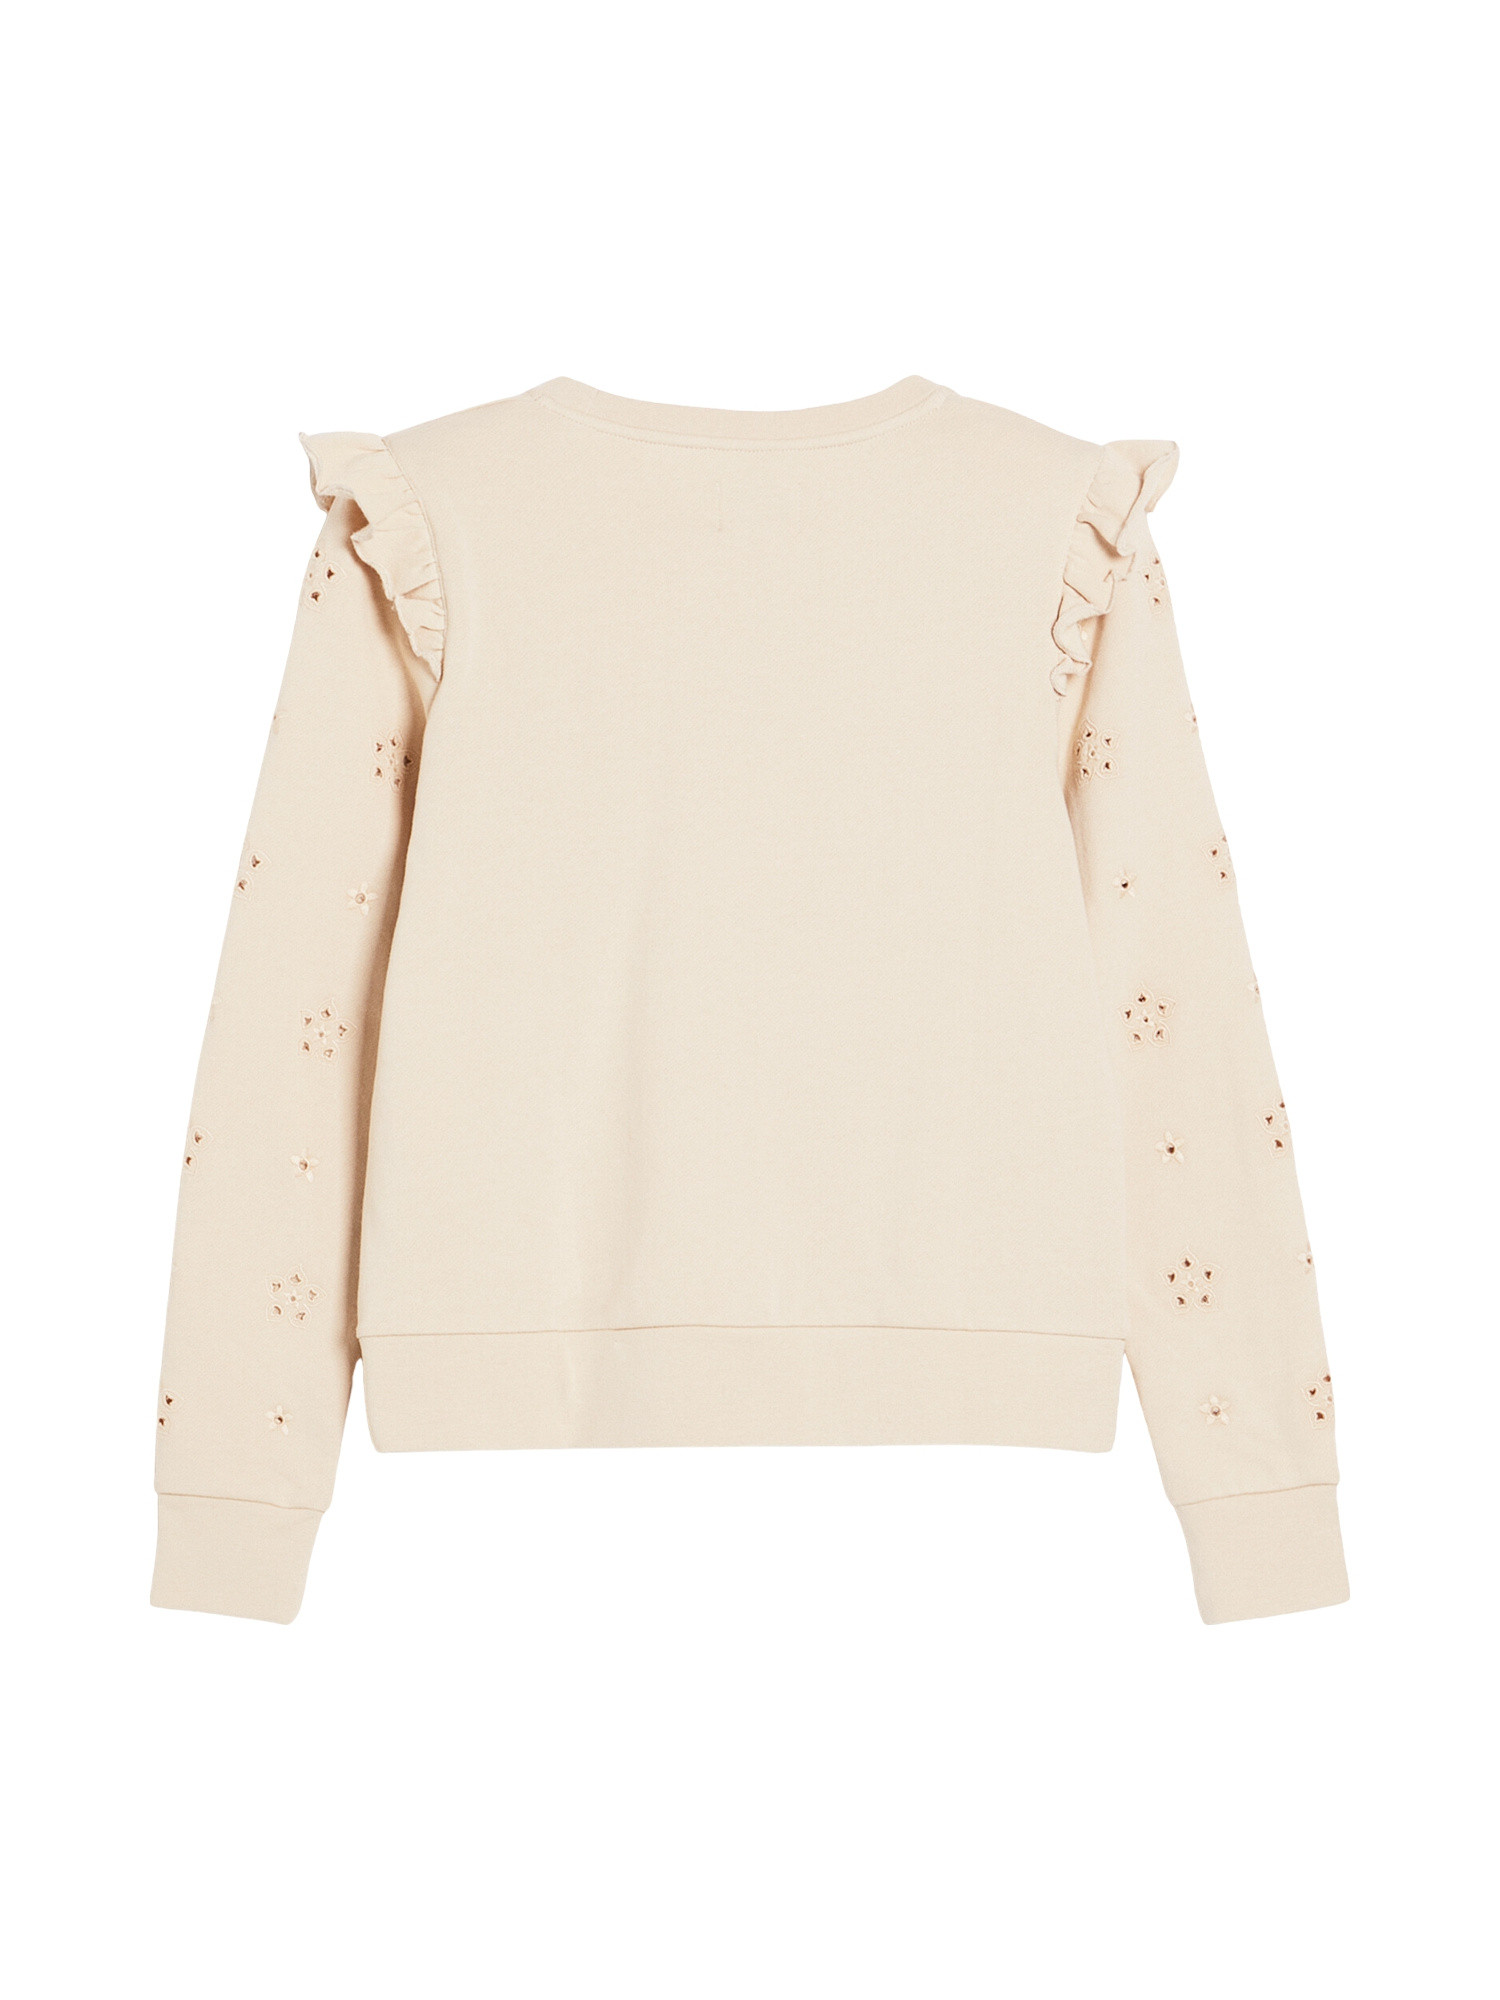 Pepe Jeans - Cotton sweatshirt with ruffles, Cream, large image number 1